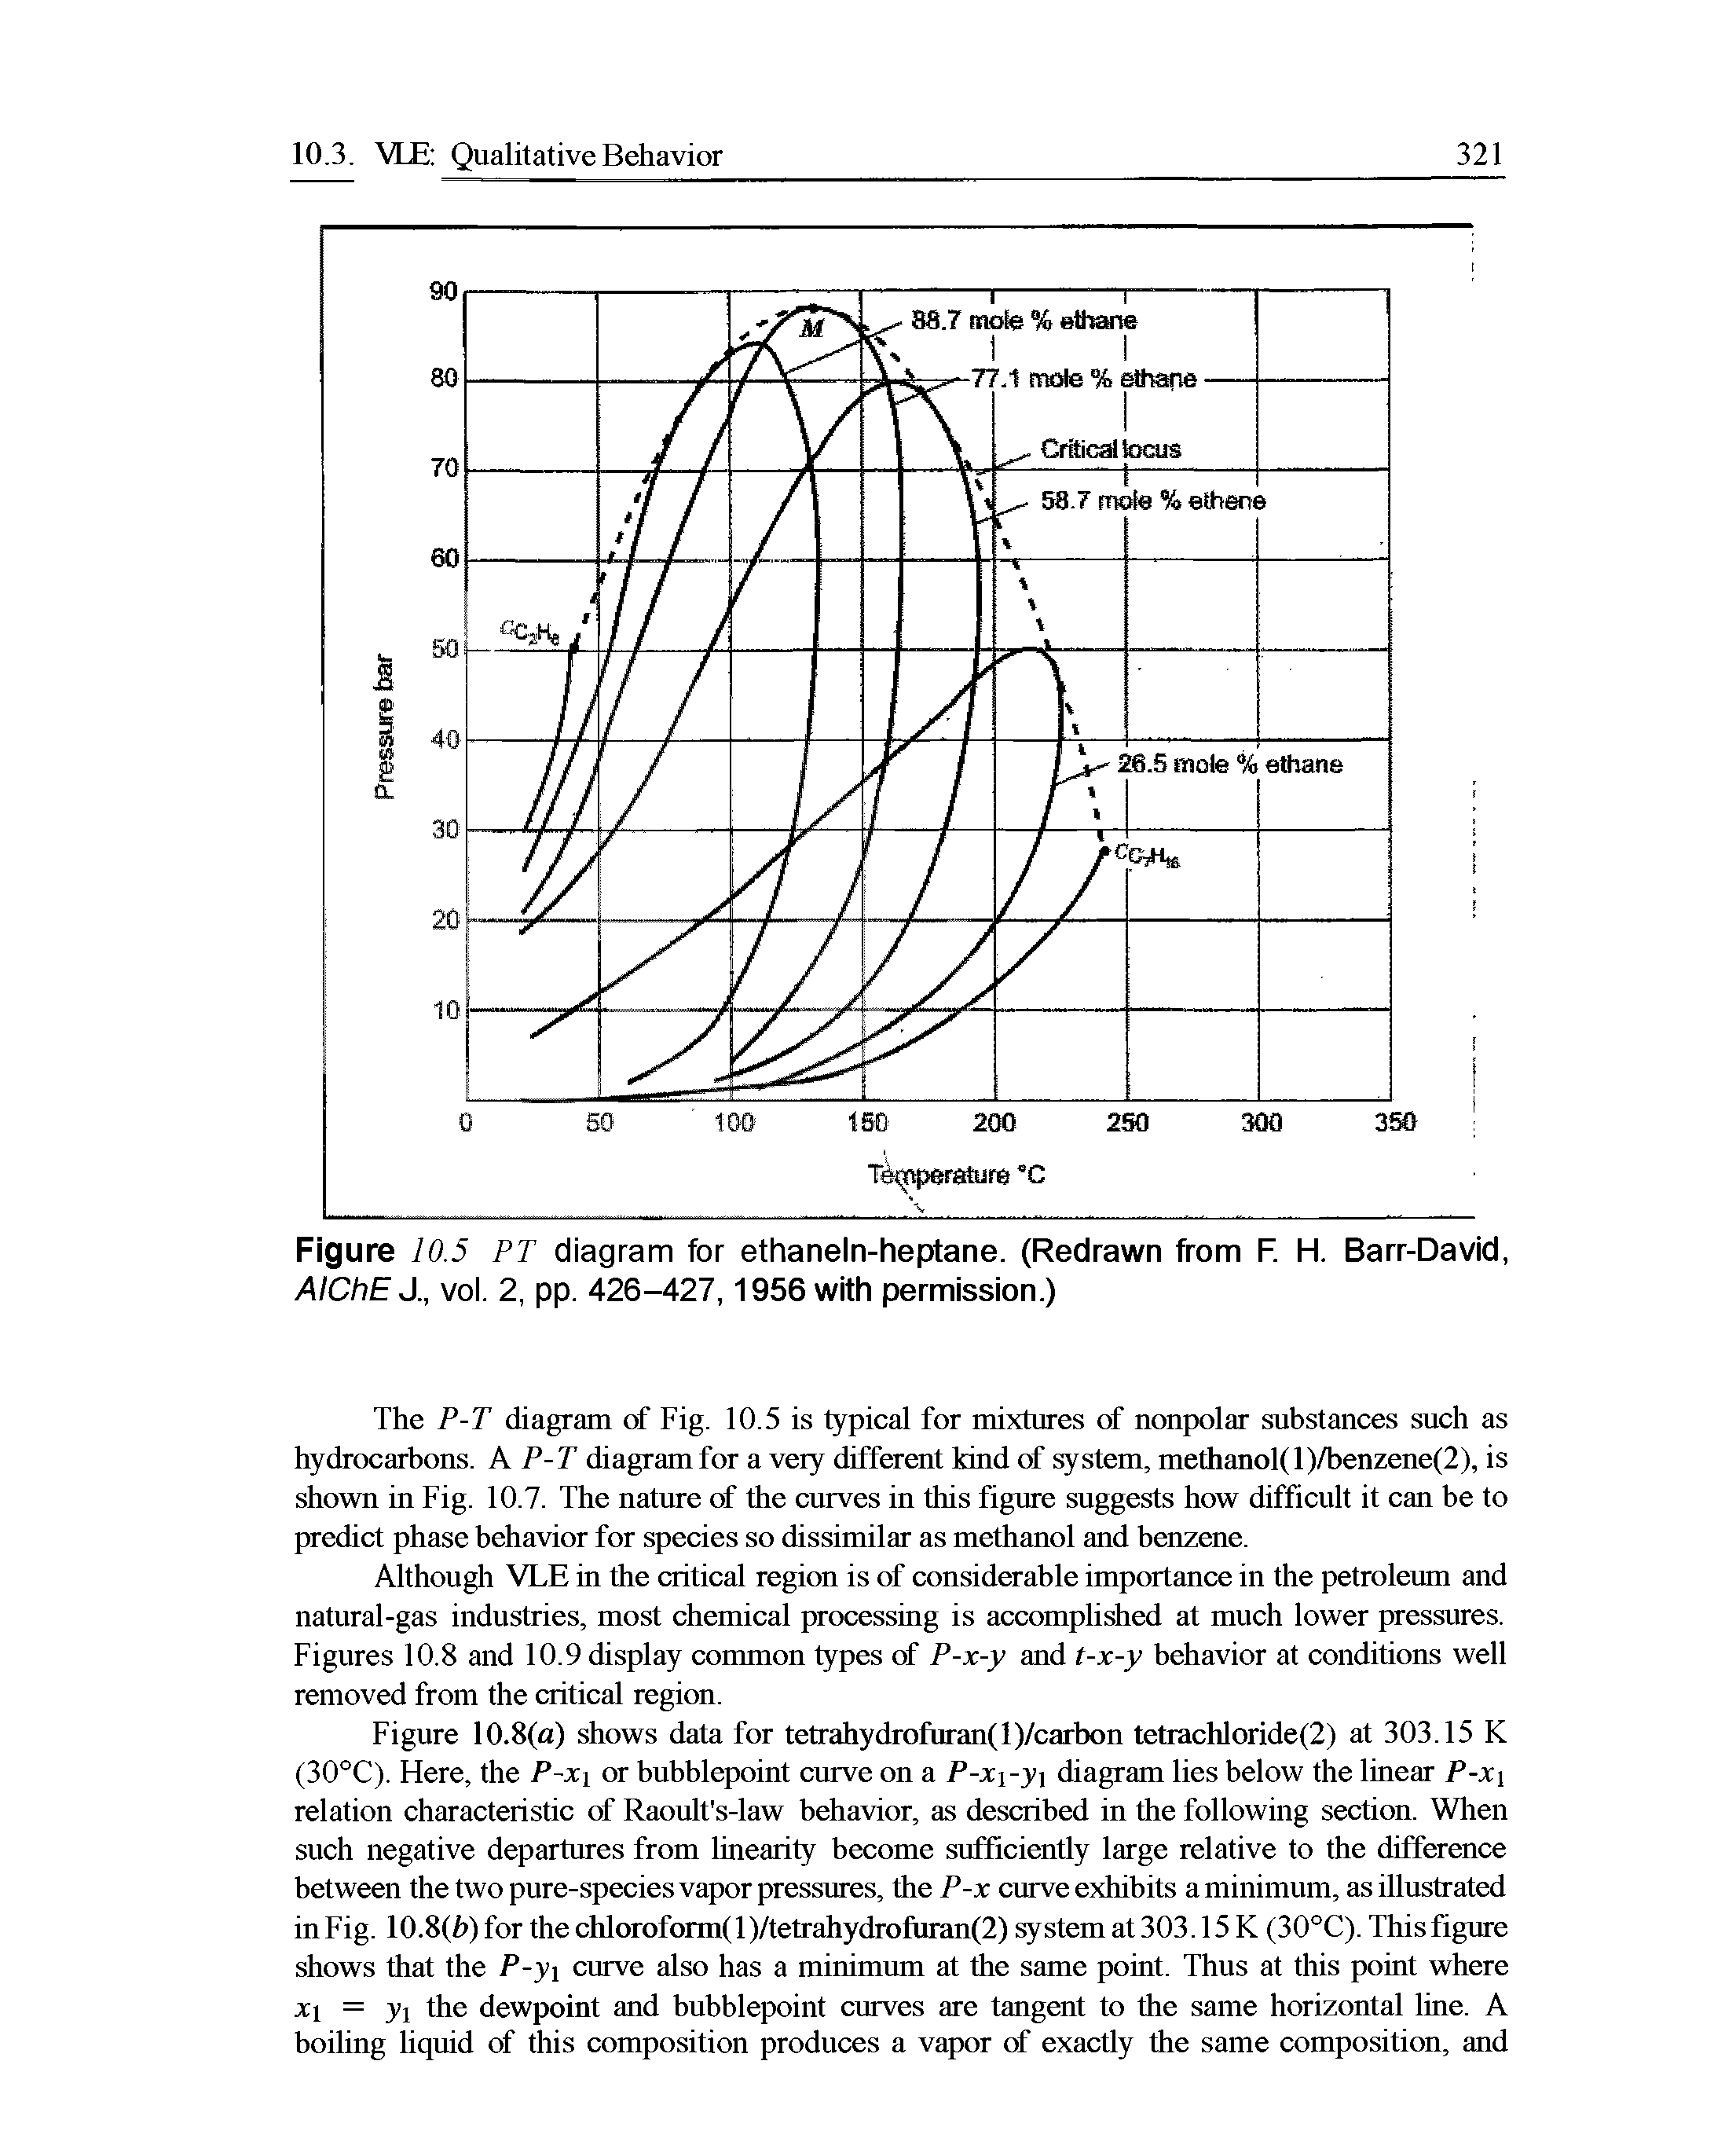 Figure 10.5 PT diagram for ethaneln-heptane. (Redrawn from F. H. Barr-David, AlChE J., vol. 2, pp. 426-427,1956 with permission.)...